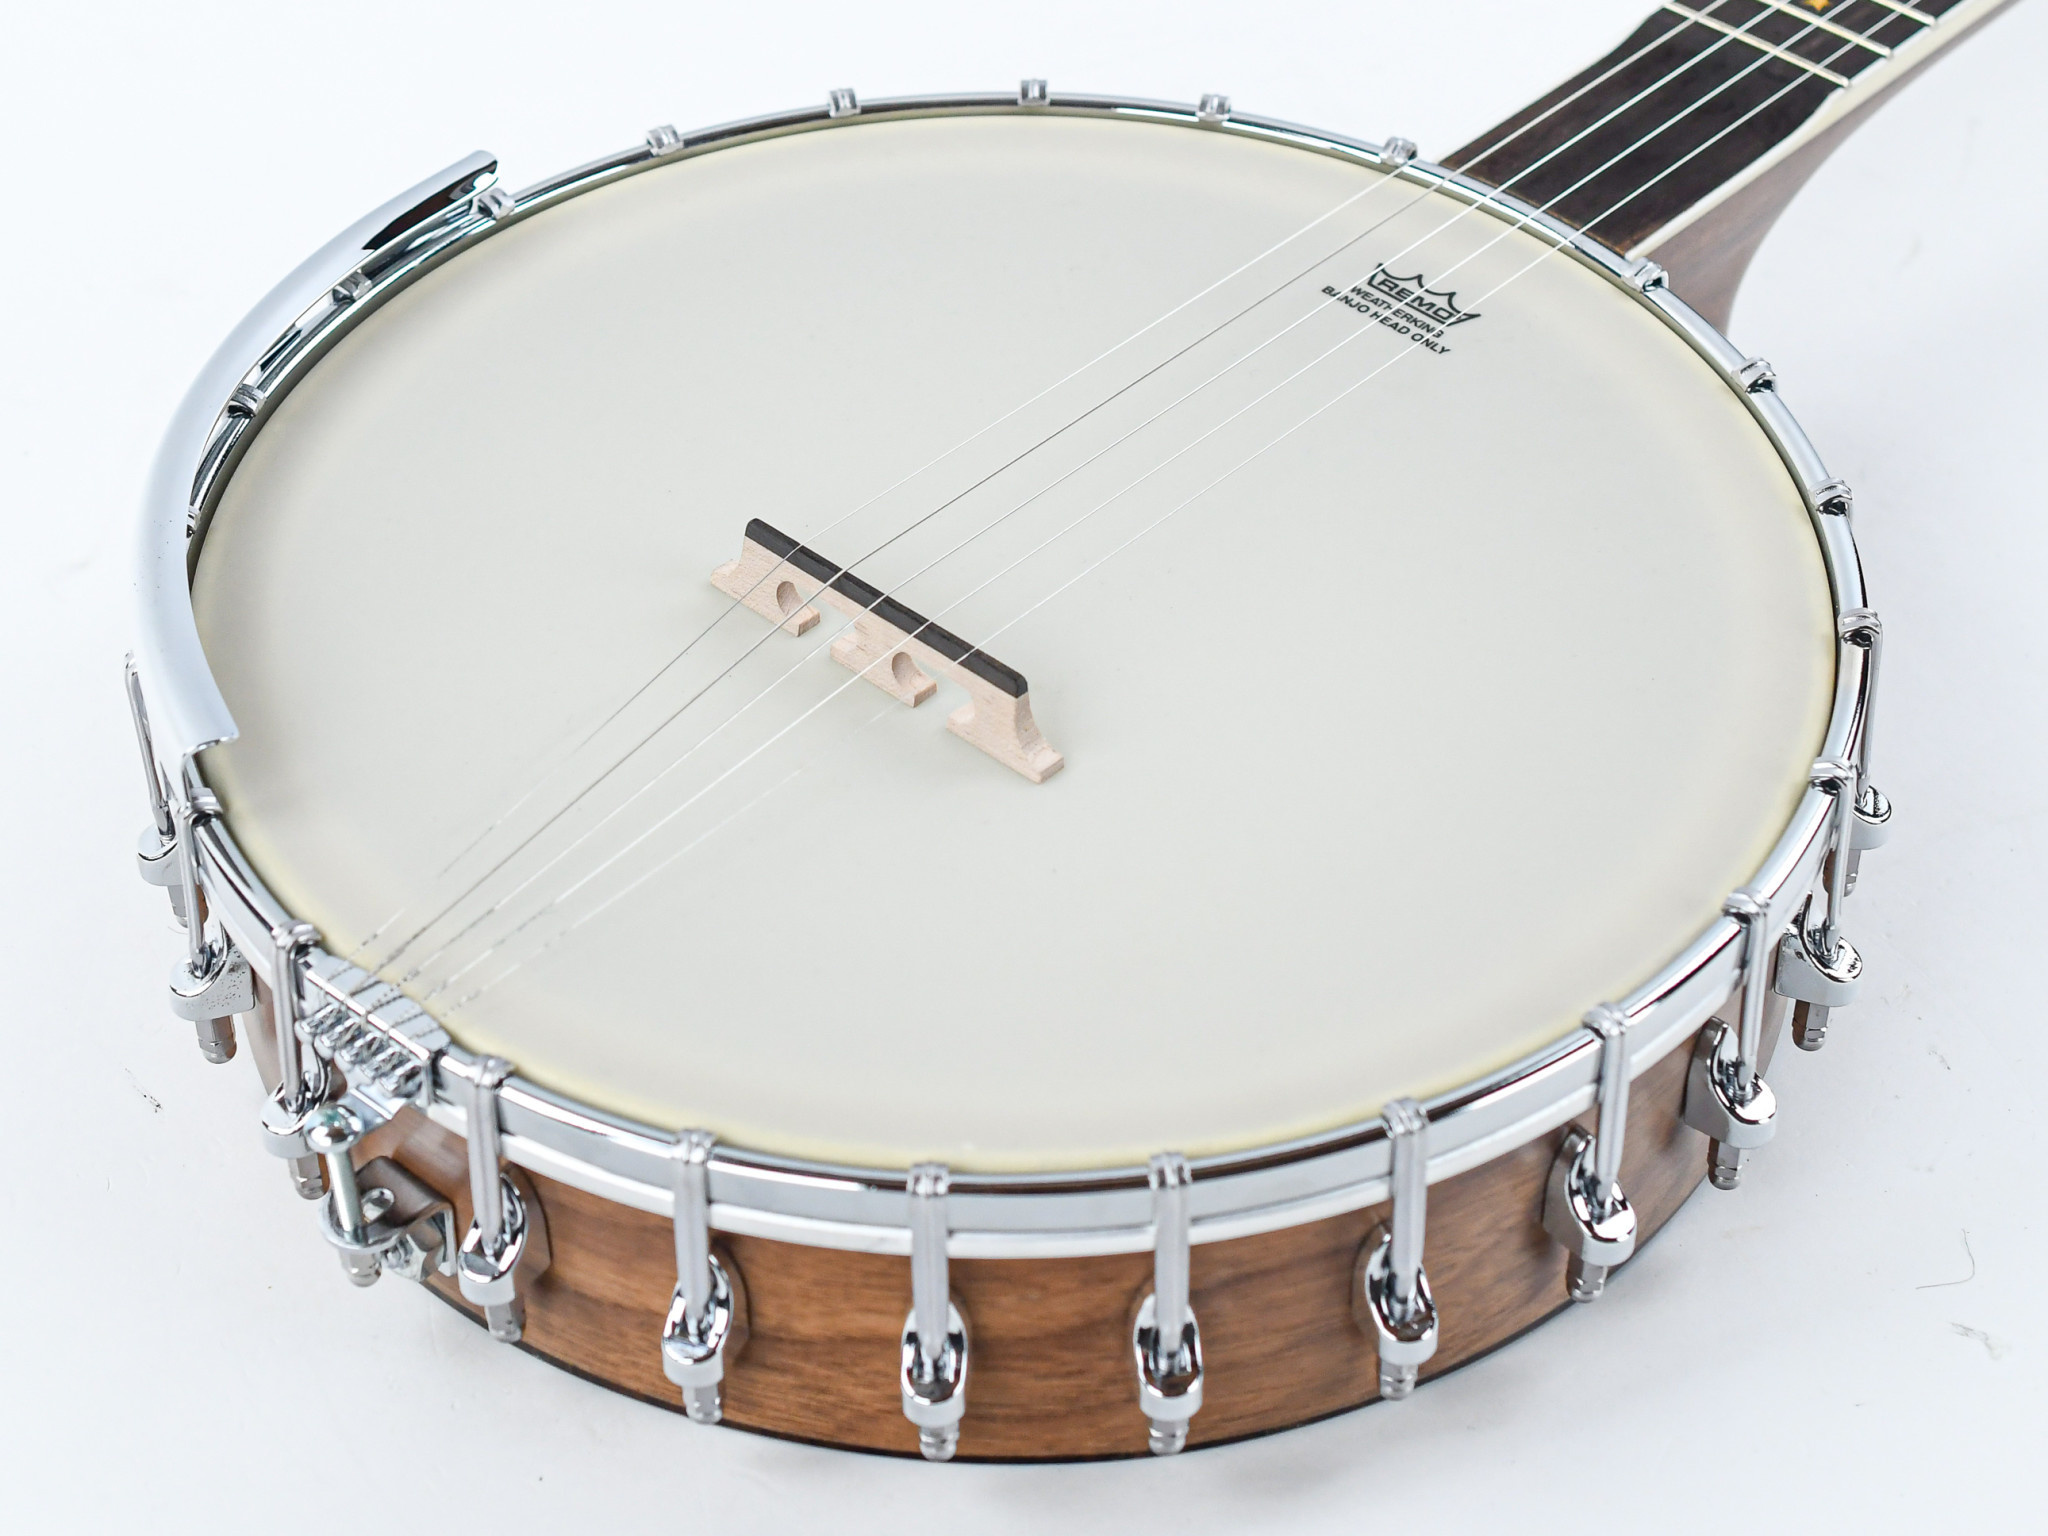 Banjo: Ashbury AB85 5 String Openback, A musical instrument like a small guitar with a round body. 2050x1540 HD Background.